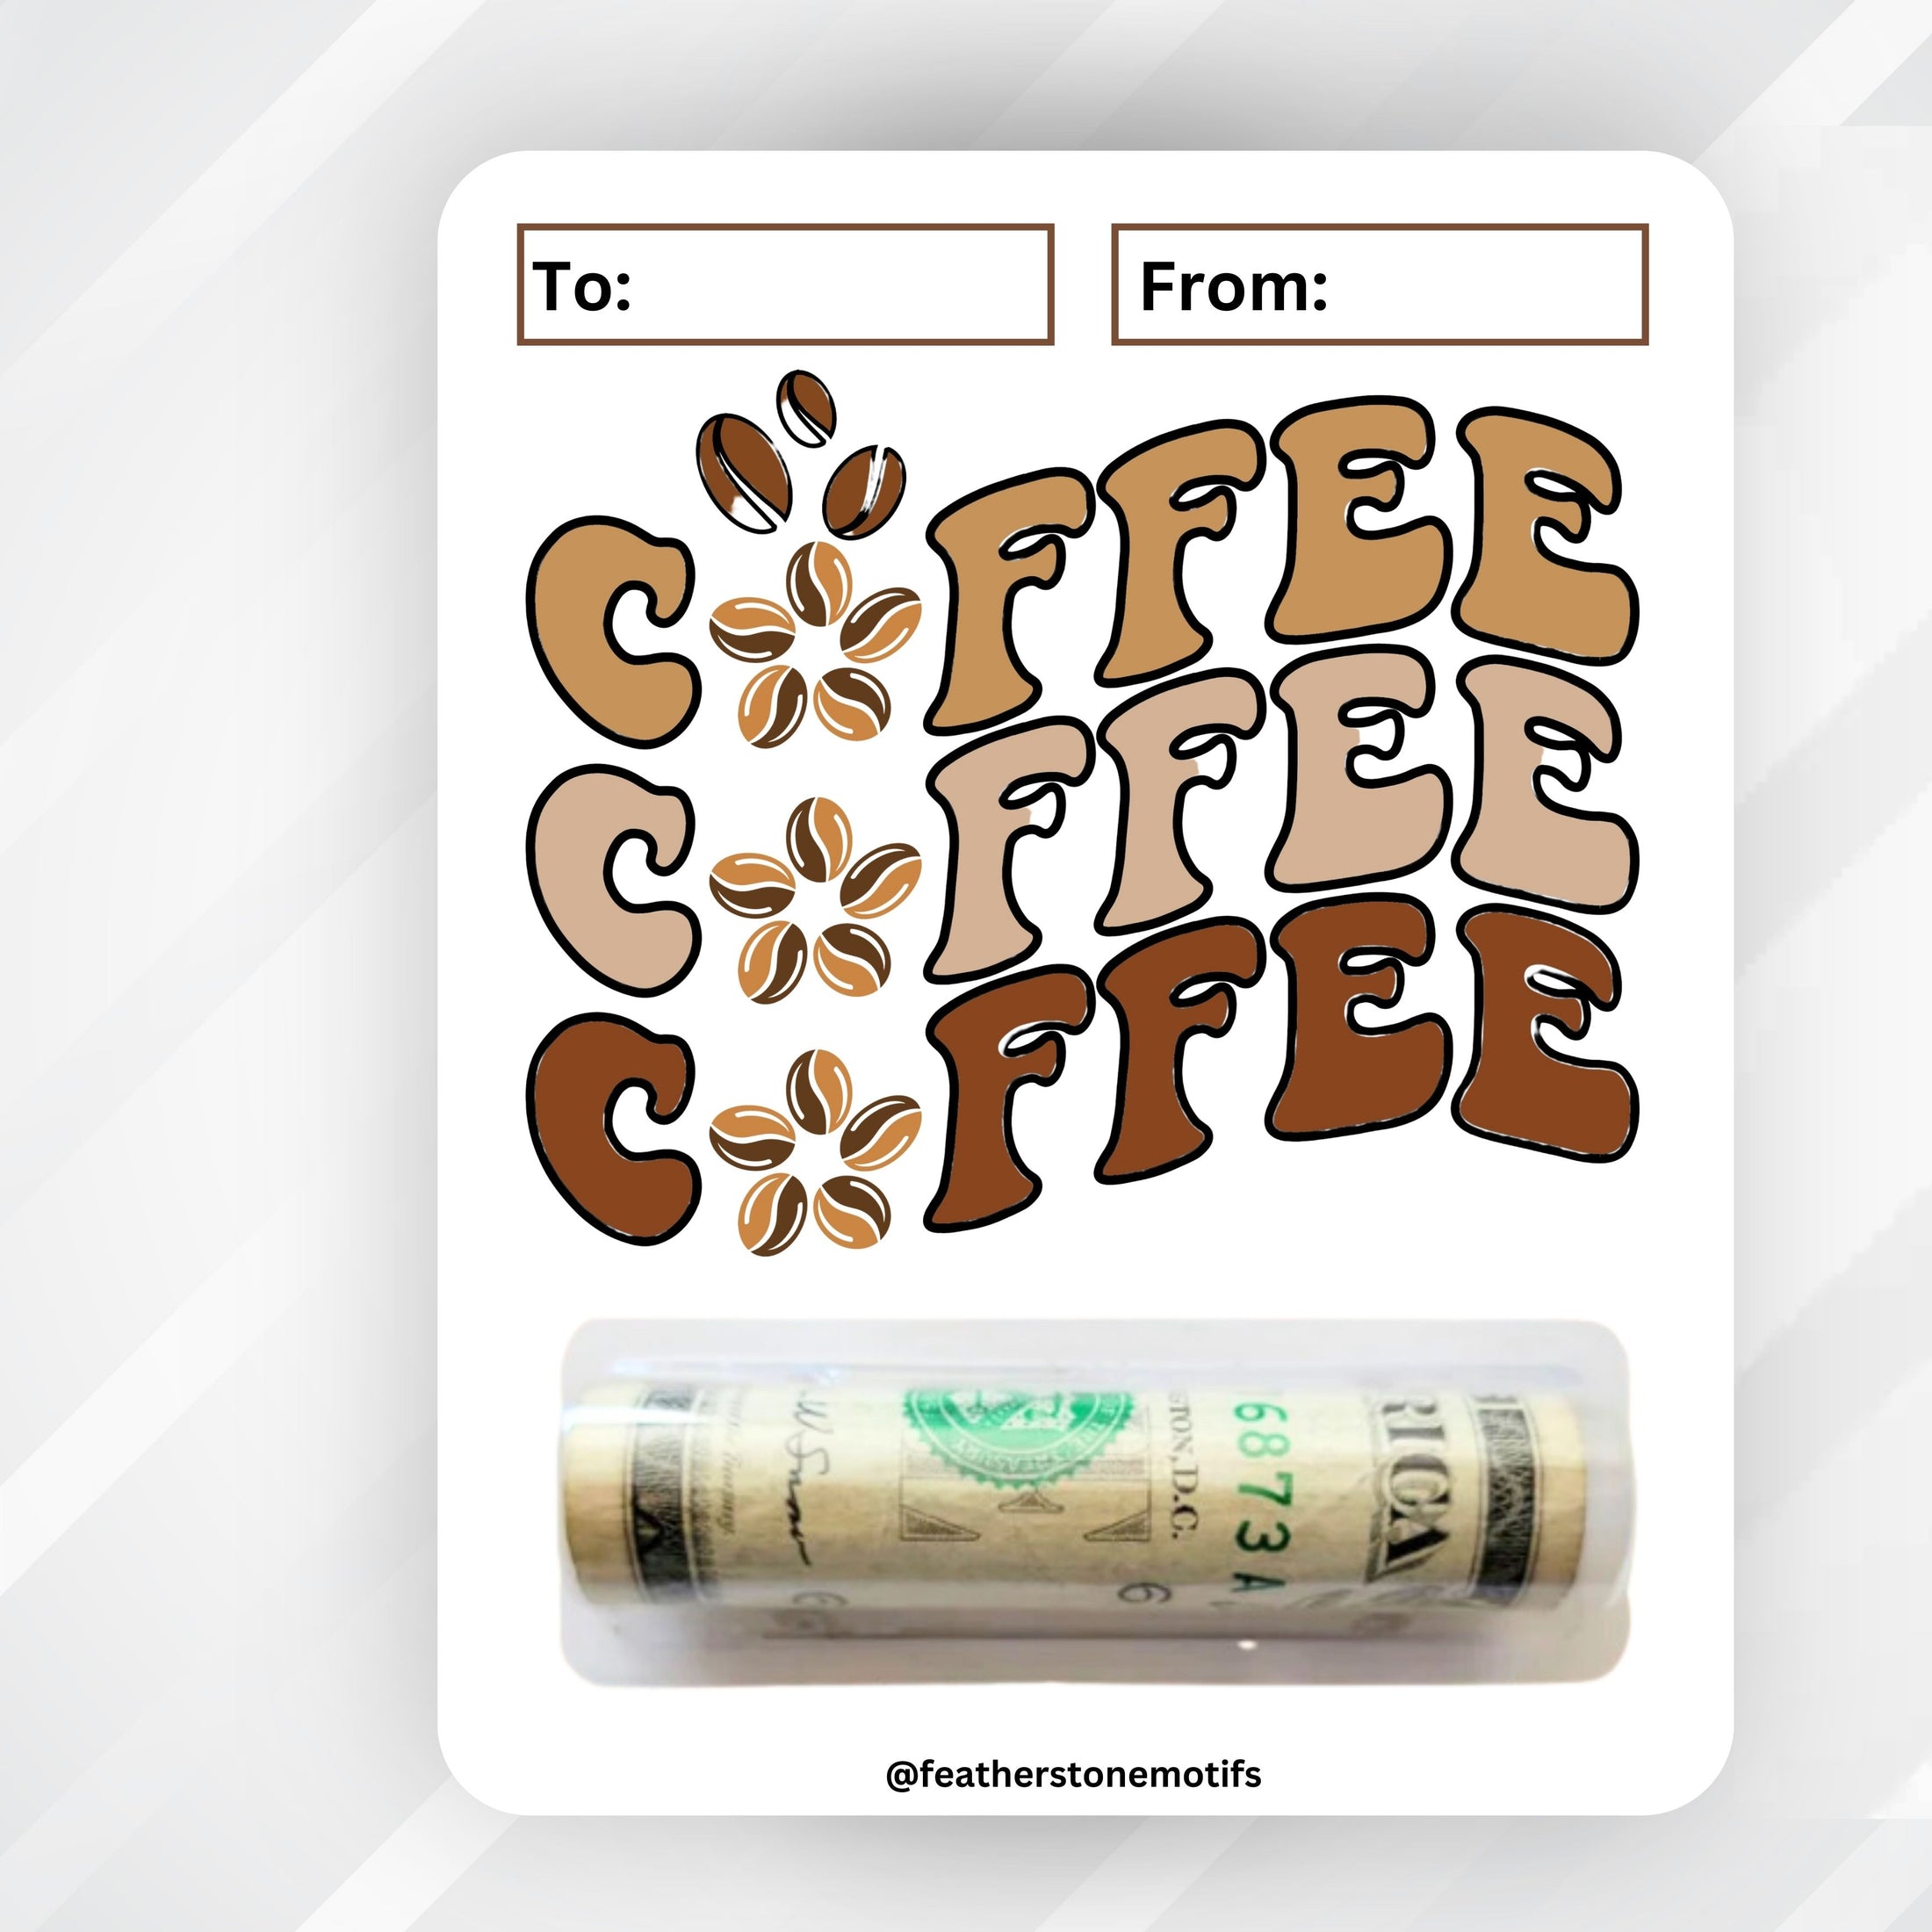 This image shows the money tube attached to the Coffee Money Card.